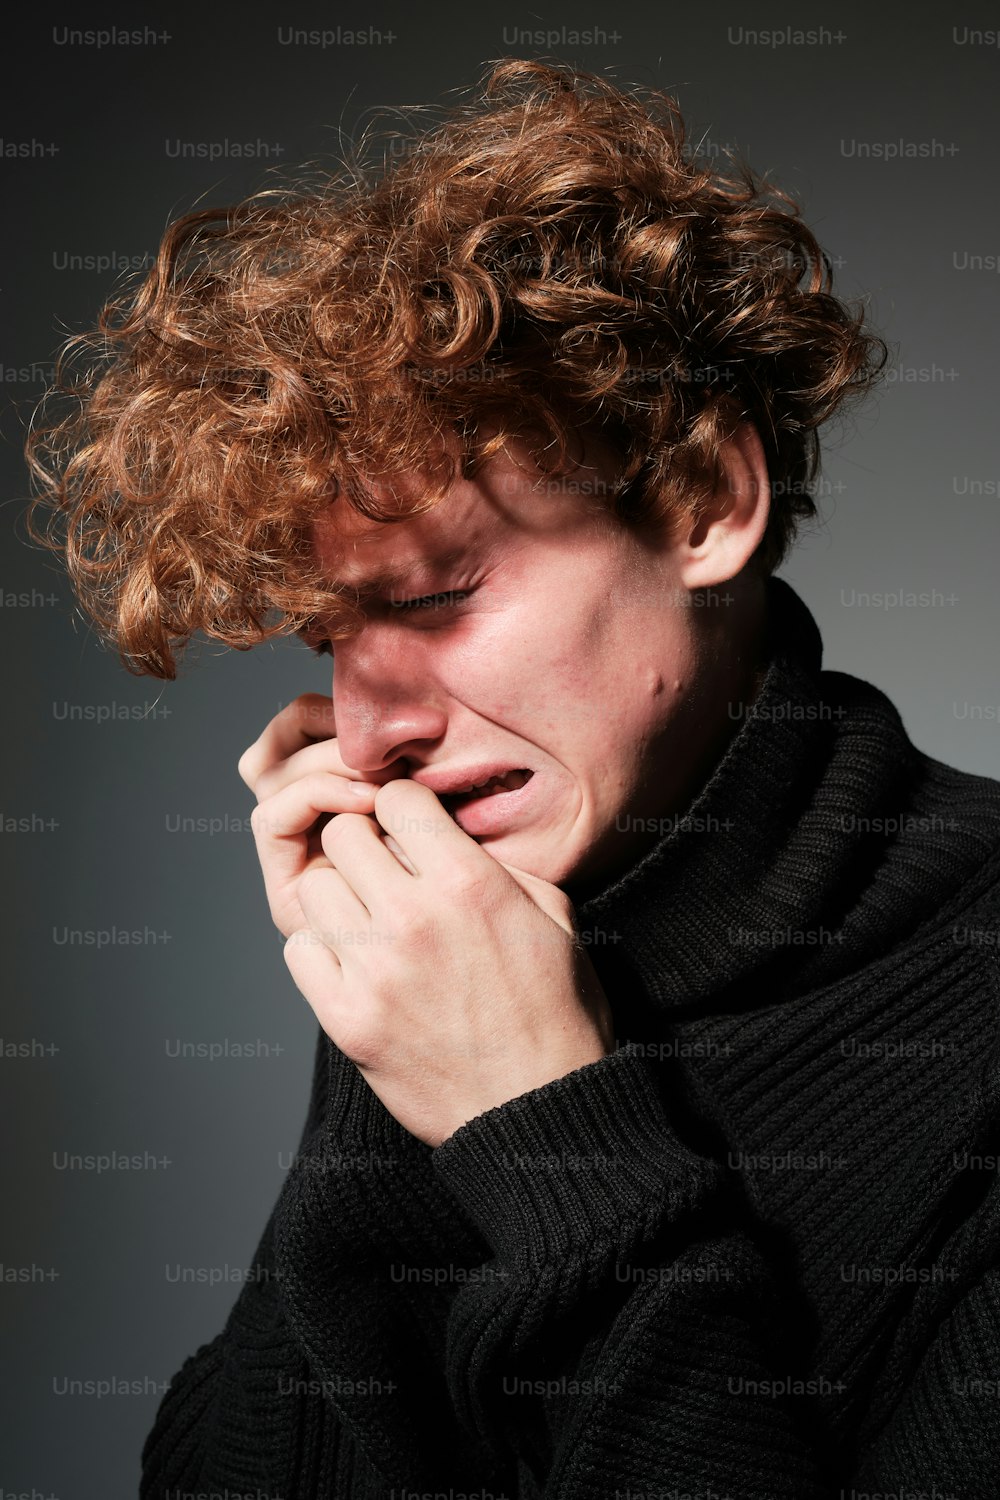 a man with curly hair covers his face with his hands